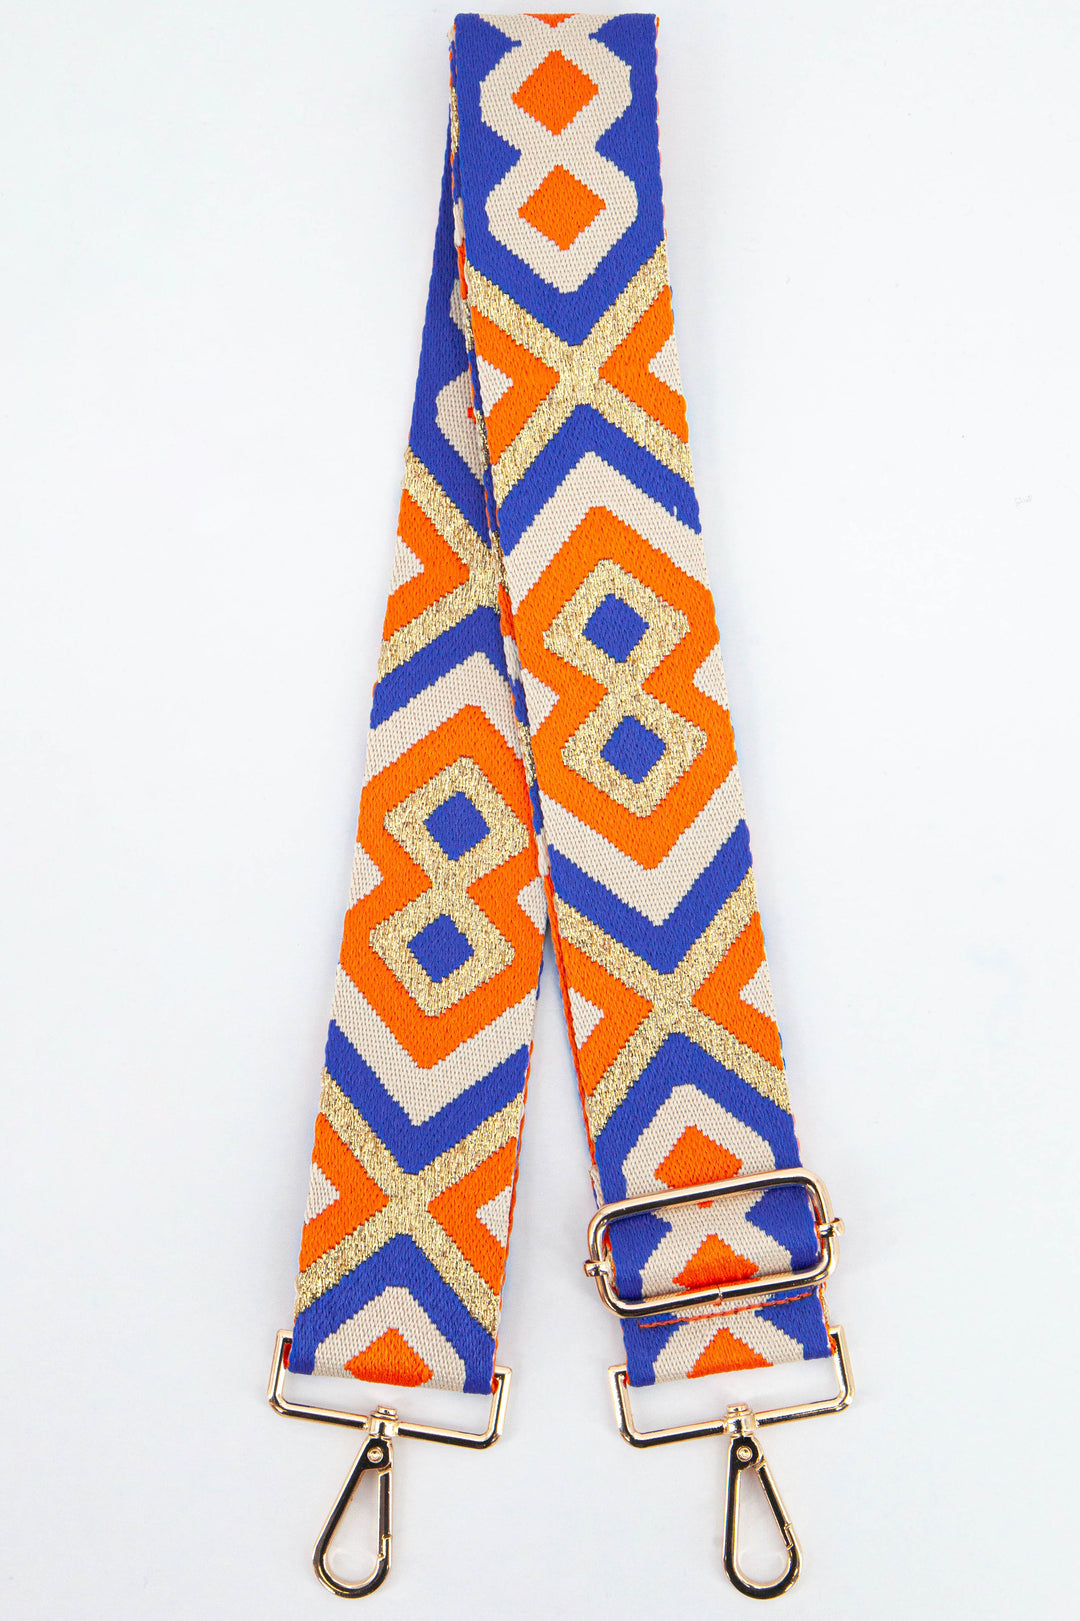 wide woven bag strap with a bold blue and orange aztec print with gold metallic glitter threading throughout